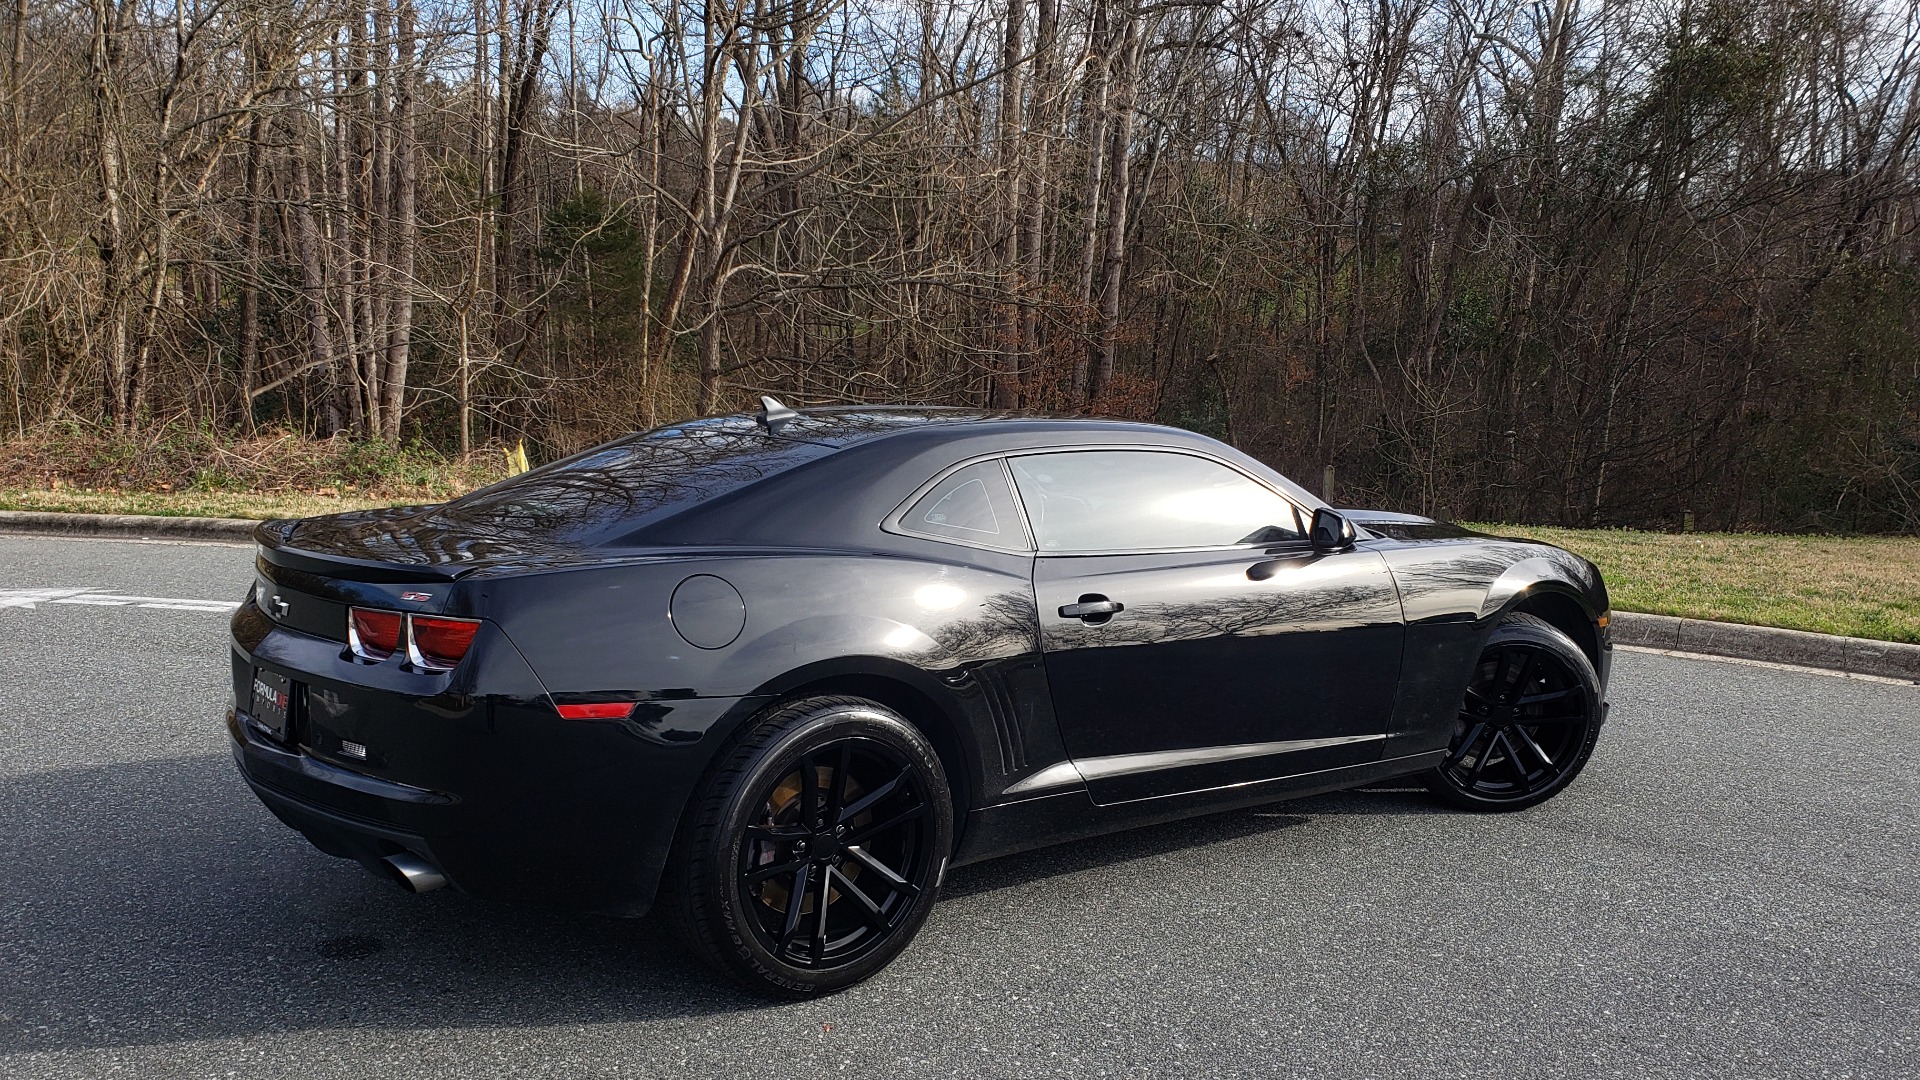 Used 2011 Chevrolet Camaro 2SS / 6.2L V8 / 6-SPEED MANUAL / HEADERS / INTAKE for sale Sold at Formula Imports in Charlotte NC 28227 6